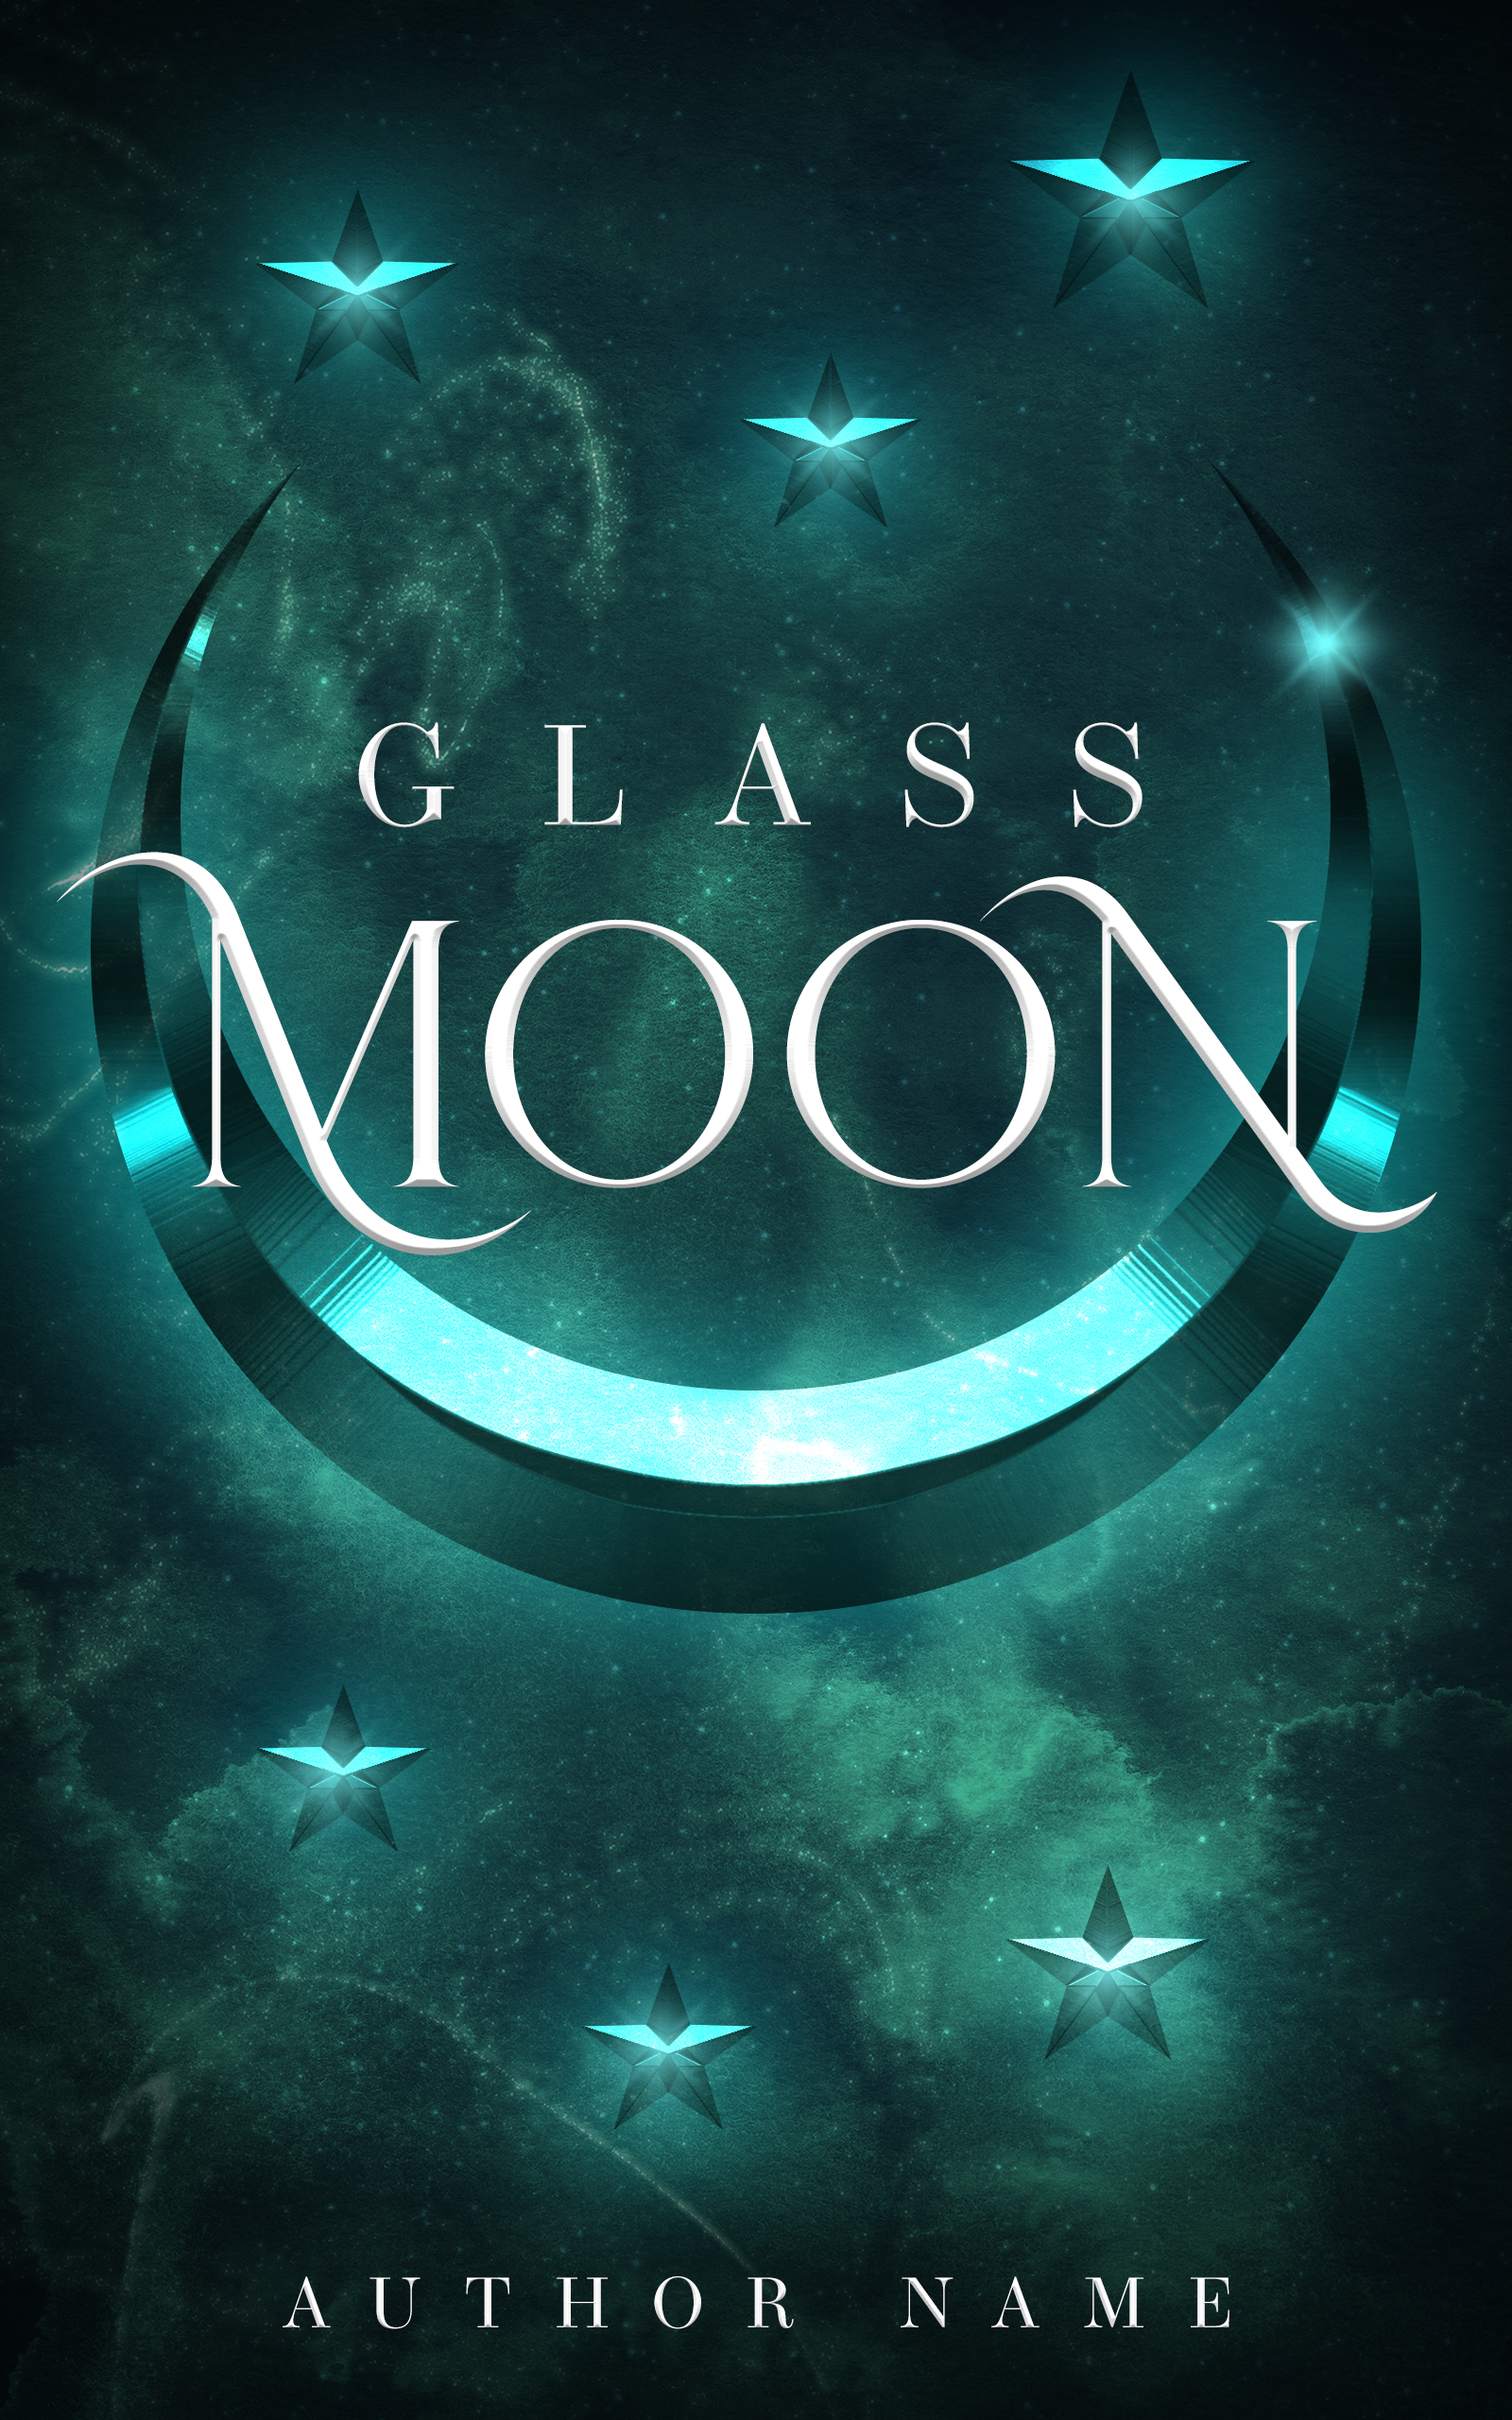 Glowing moon celestial book cover design.